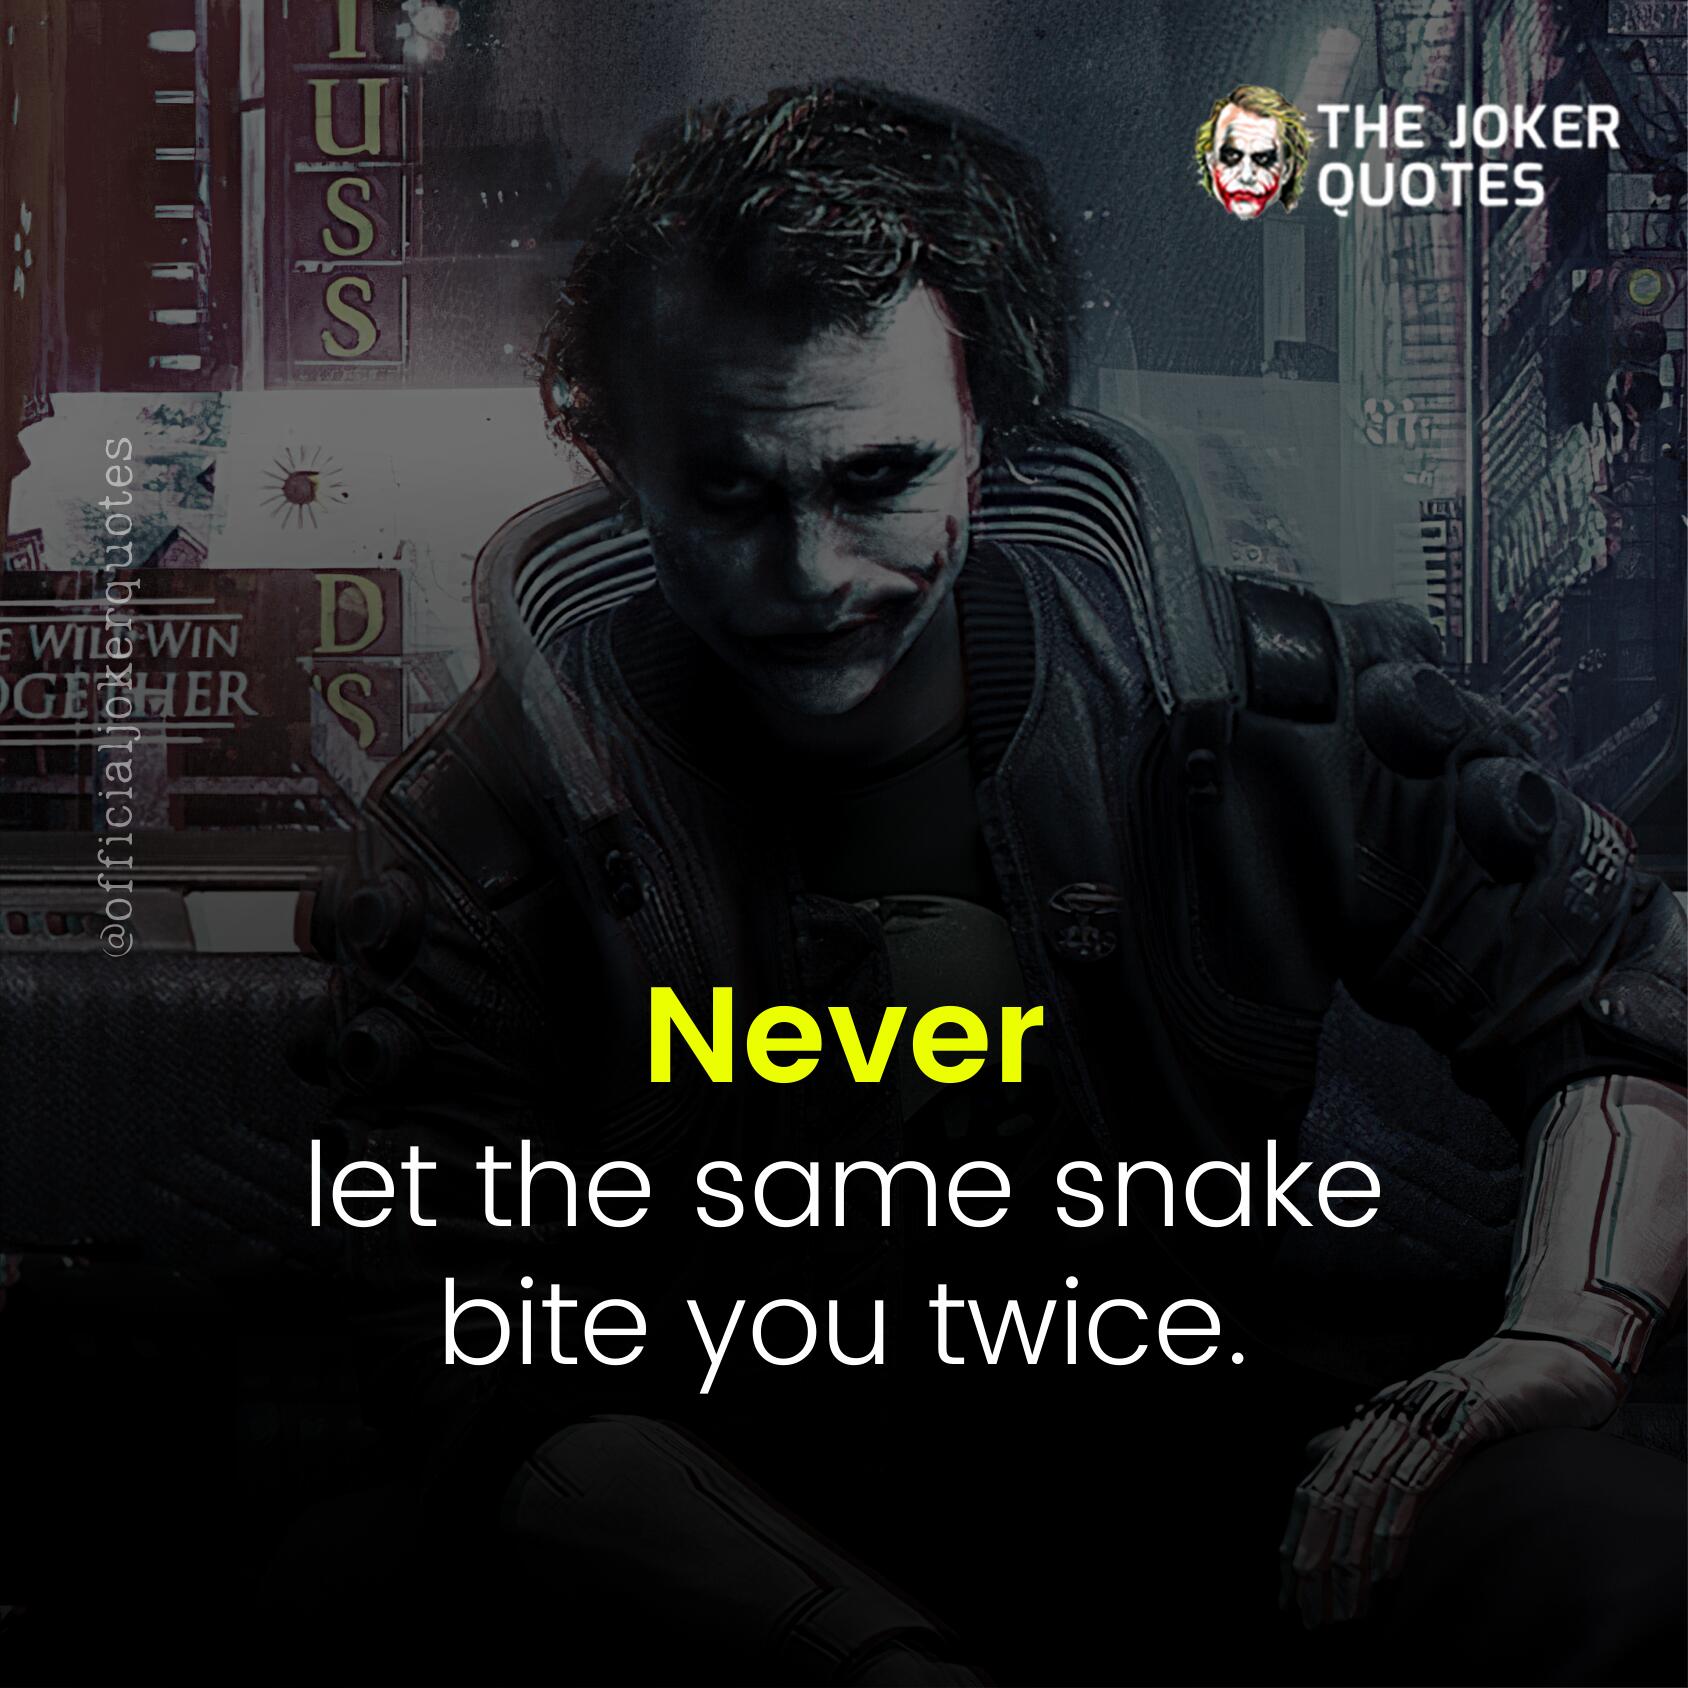 Never let the same snake bite you twice.